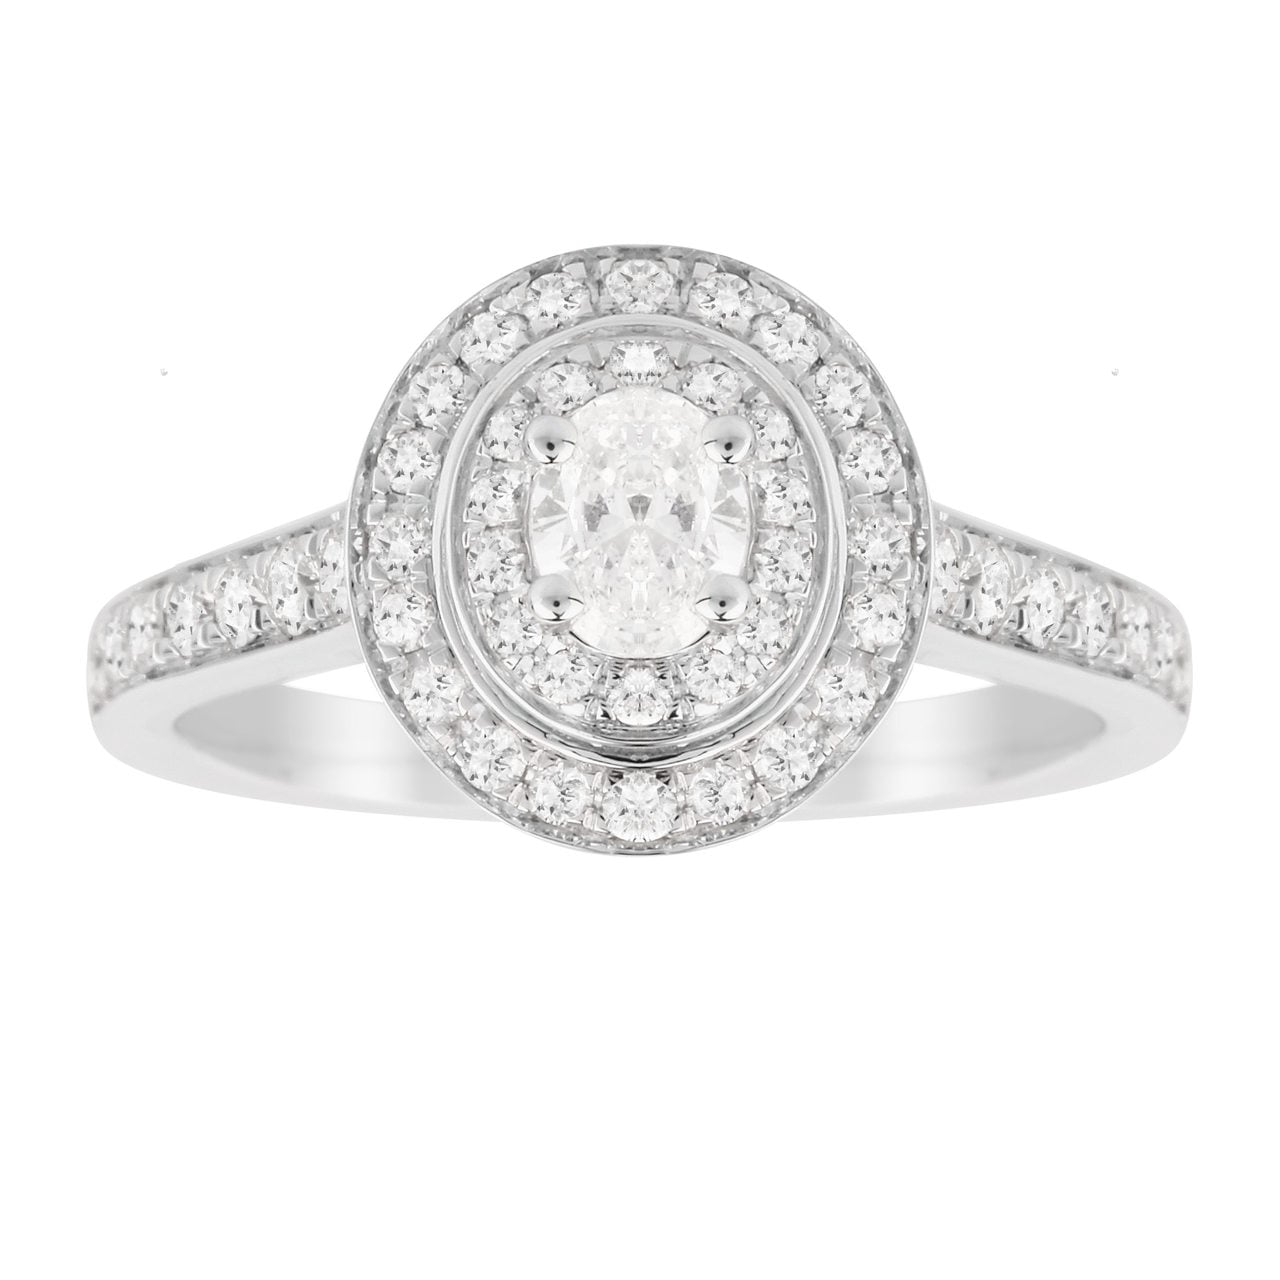 Oval Cut 0.70 Carat Total Weight Double Halo Diamond Ring In 18 Carat White Gold - Ring Size L